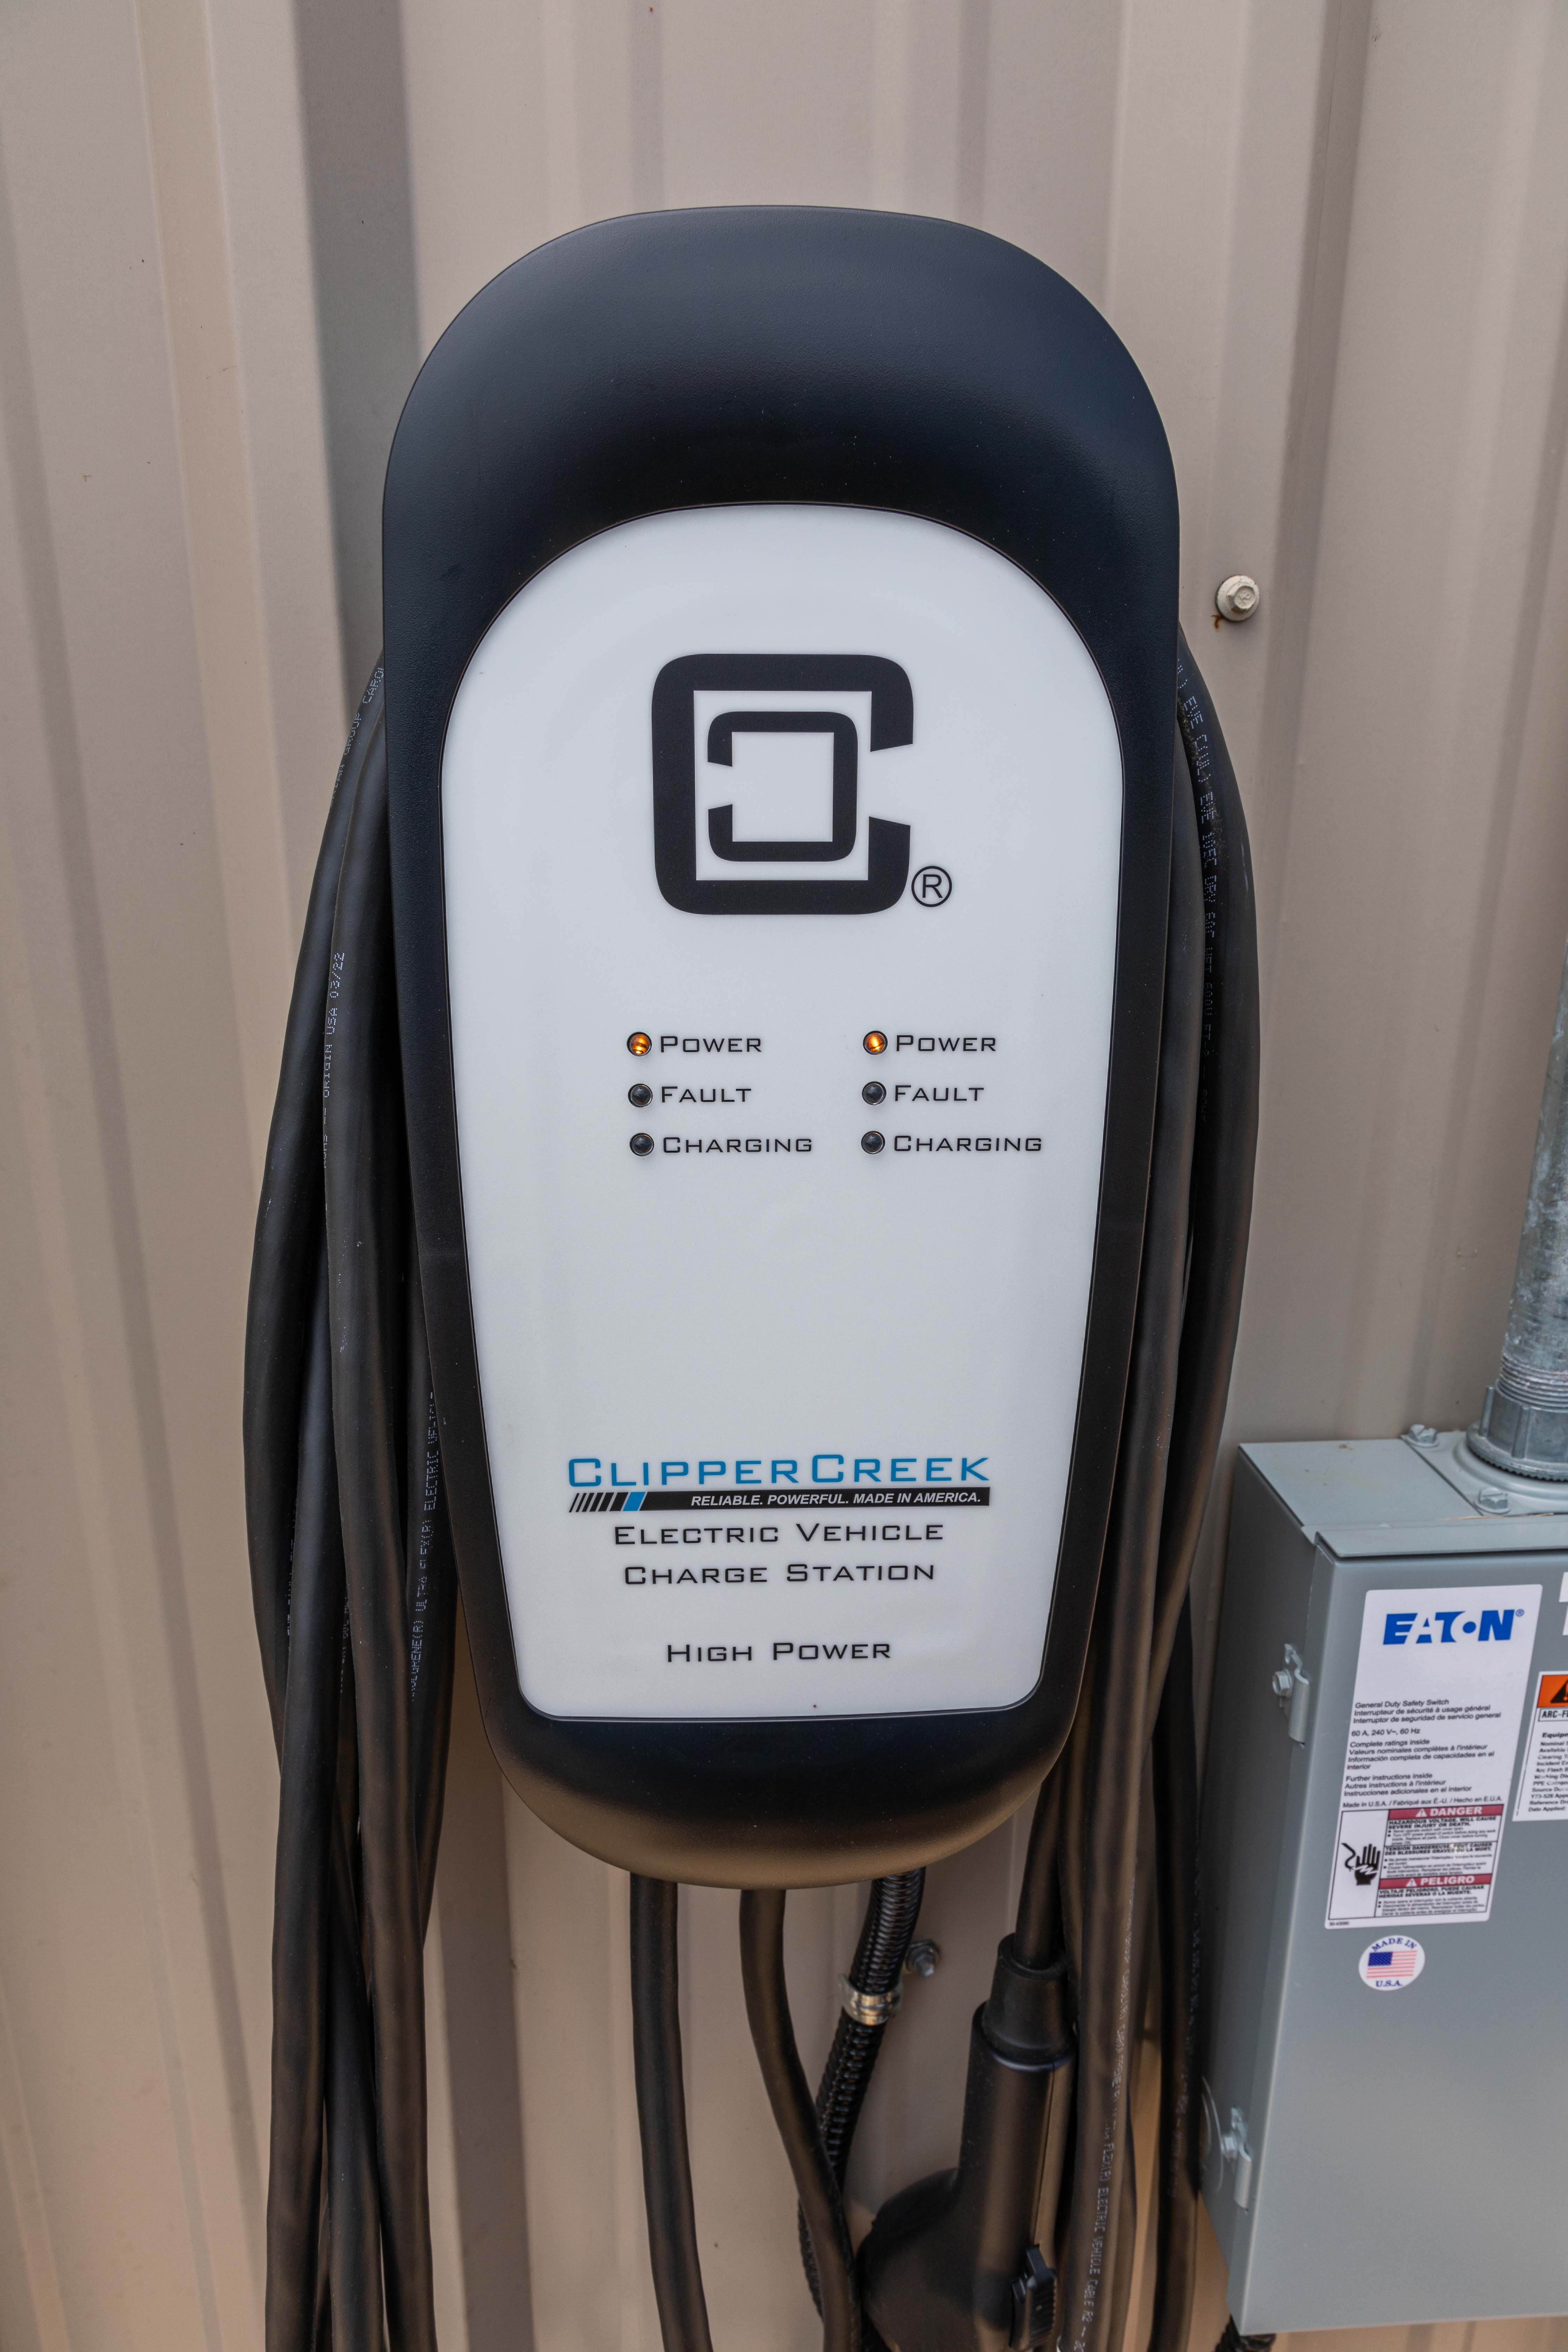 DOE Green Fleet Award funds will partially be used to install additional electric vehicle supply equipment charging stations